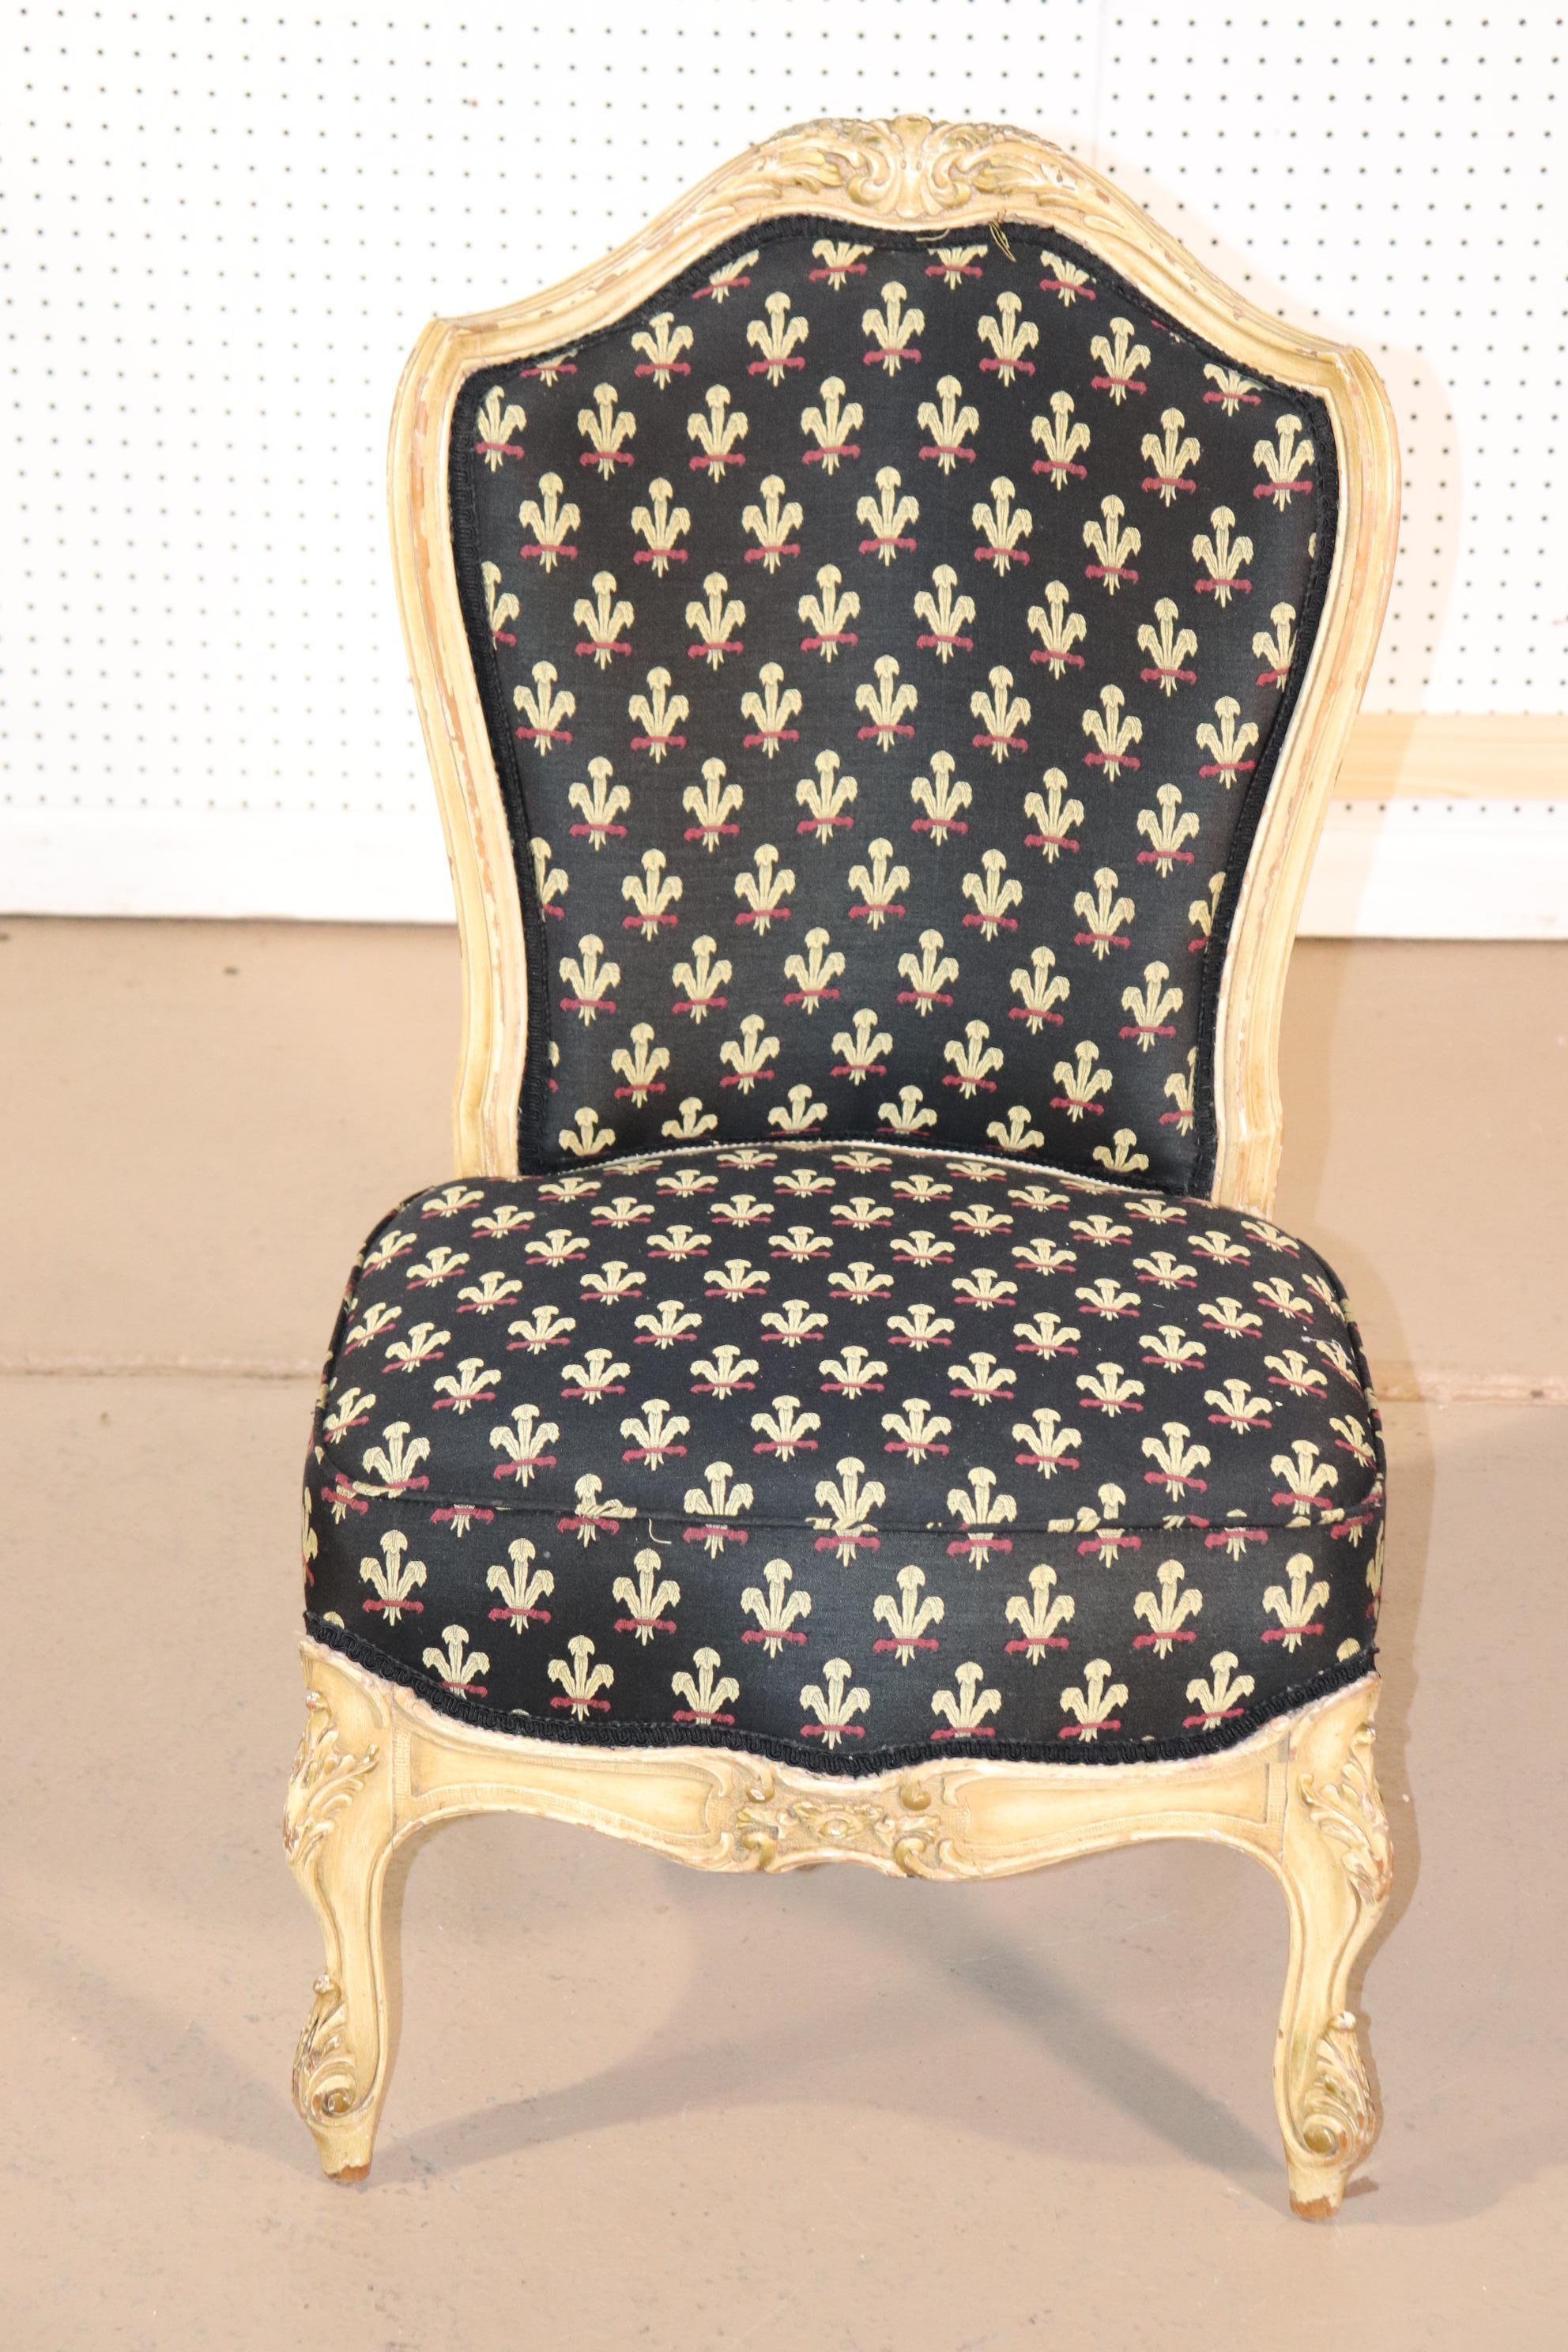 This is a beautiful antique chair that dates to the 1900s era and is painted in a beautifully distressed chair. The chair measures 34 tall x 20 wide x 18 deep and the seat height is 15 inches in seat height.